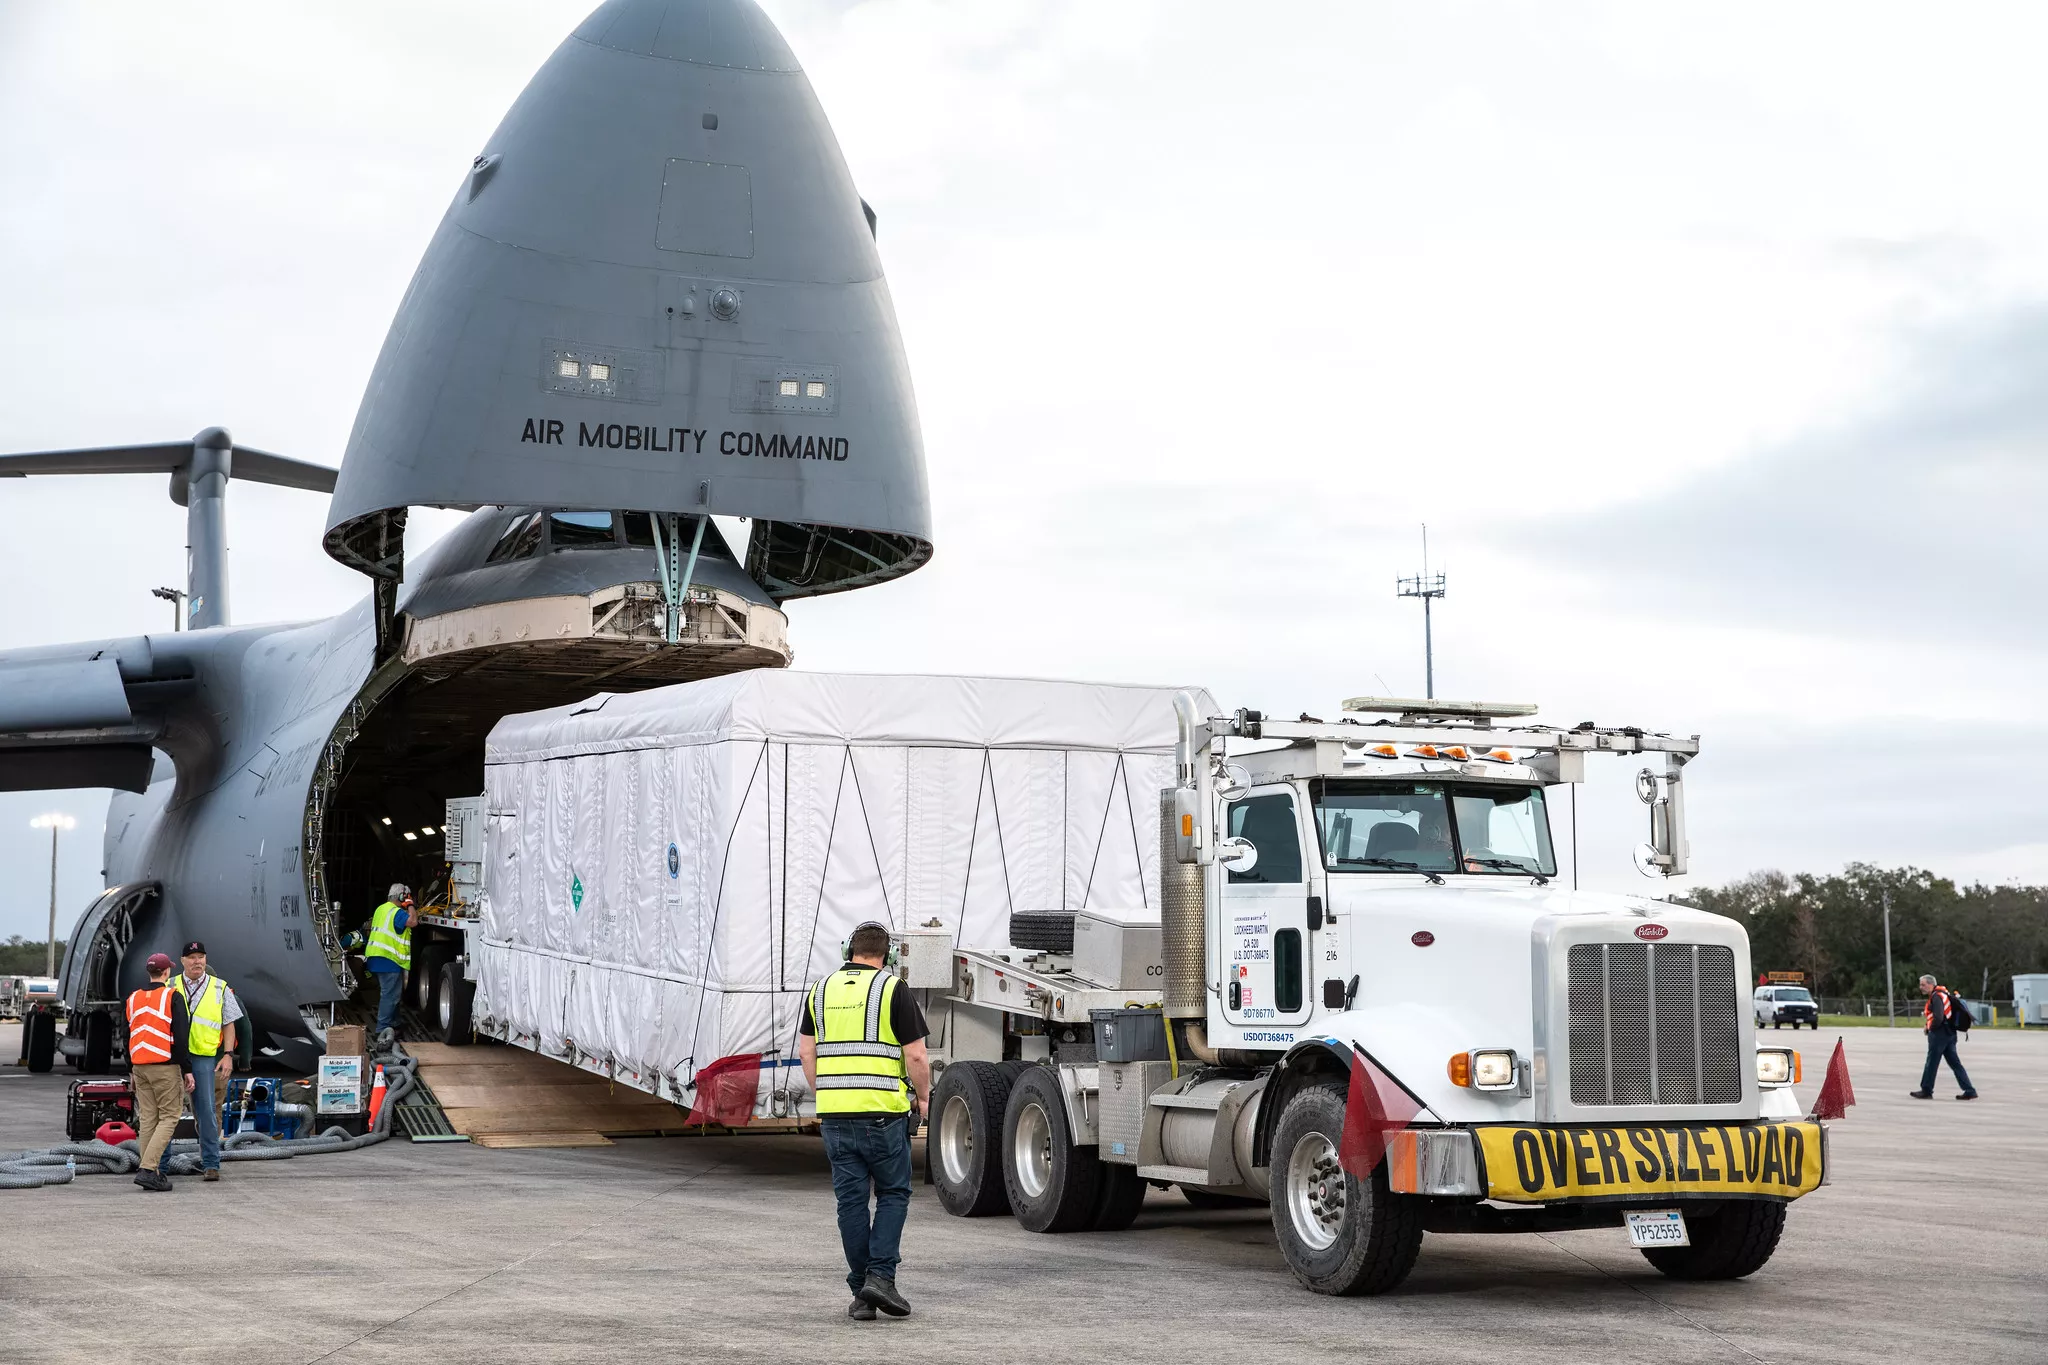 GOES-U is driven off the transport plane once it arrived at Kennedy Space Center